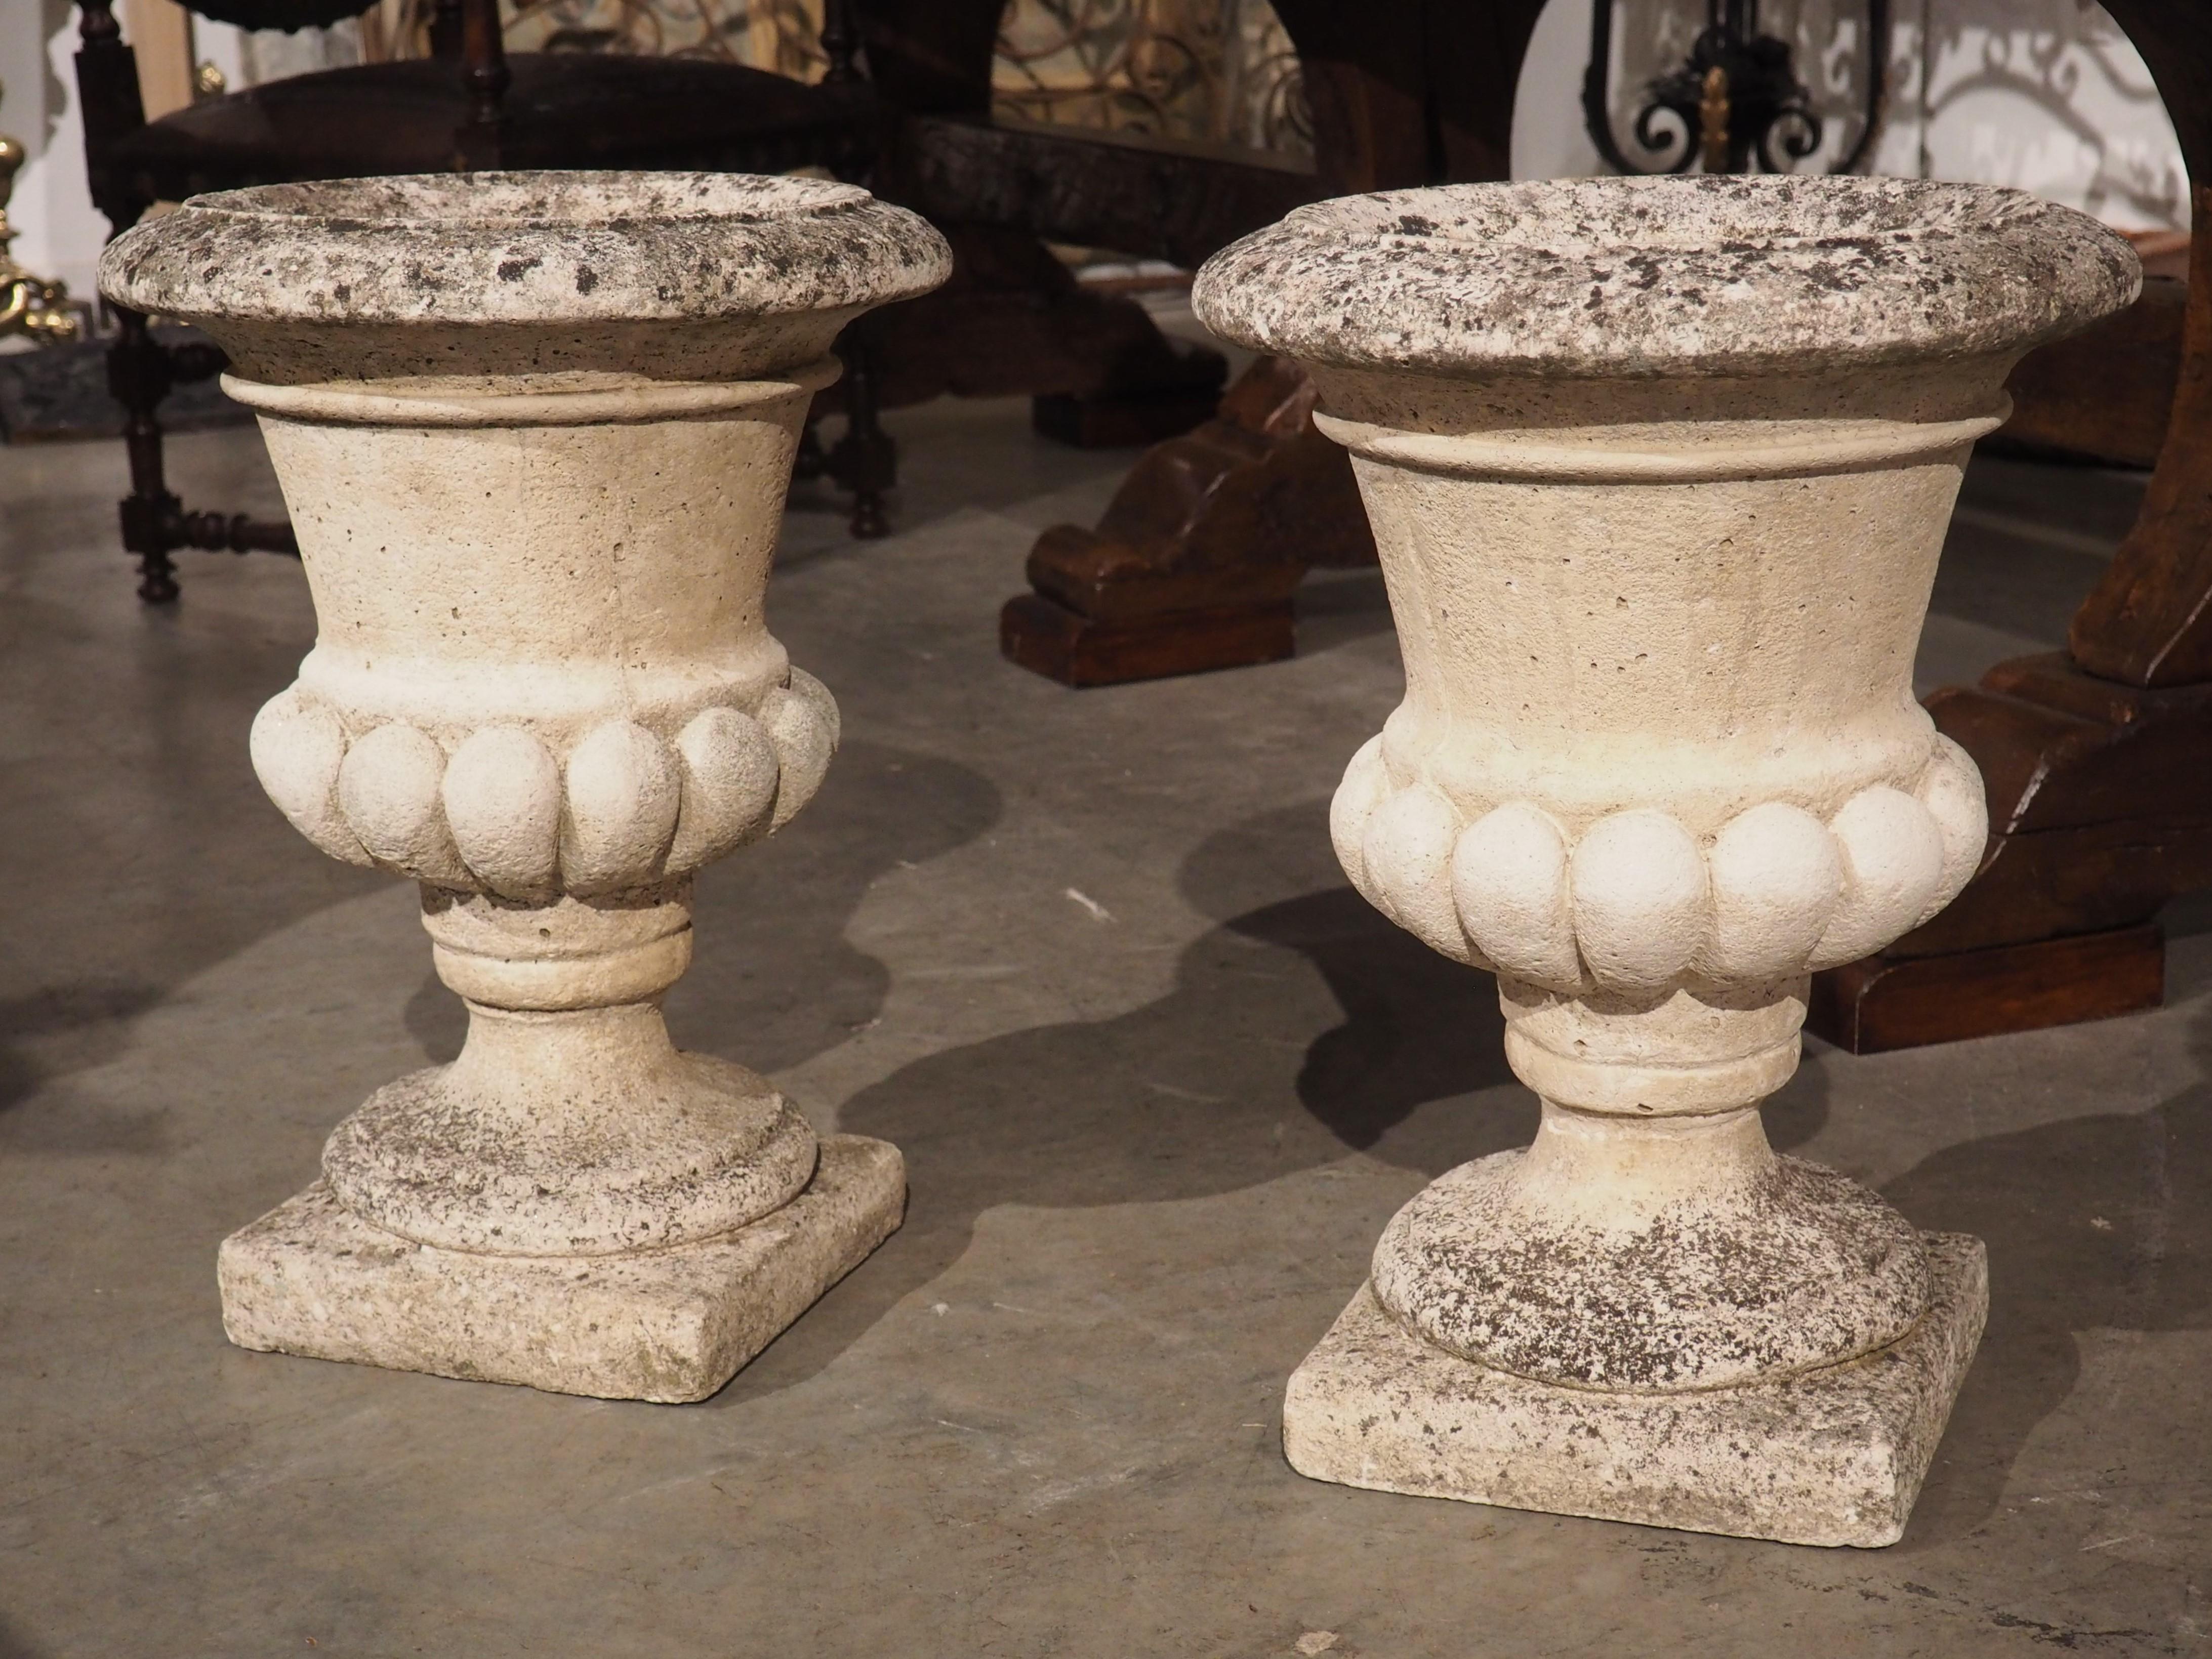 With a form that resembles a classical campana urn, our pair of vintage garden urns have been embellished with thick gadrooned lobes along a bulbous section of the main bodies. The cream colored urns from France have developed a mottled black,